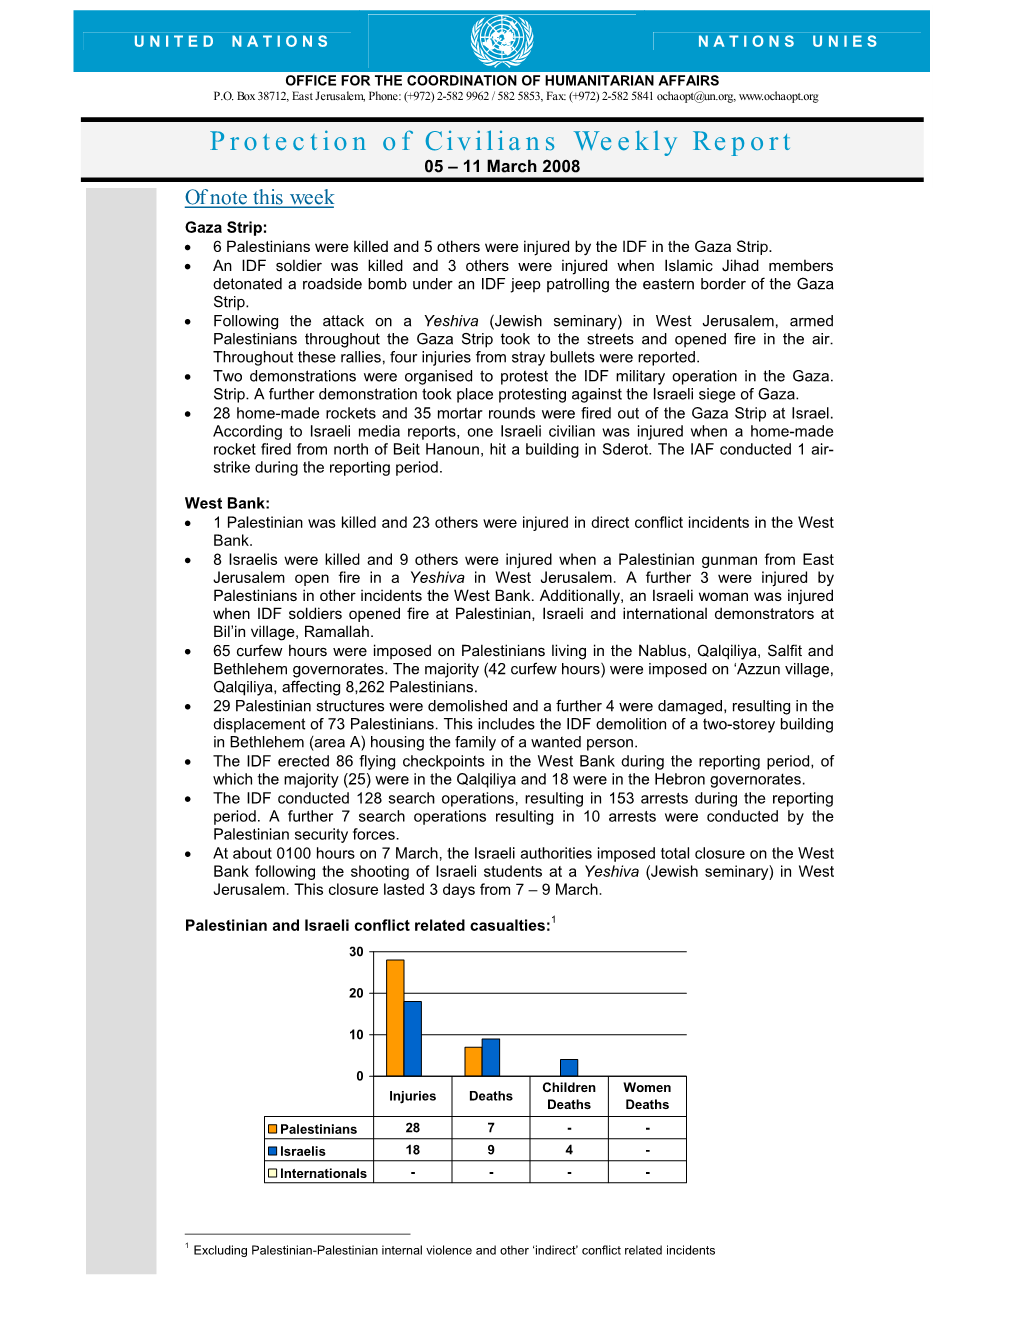 Protection of Civilians Weekly Report 05